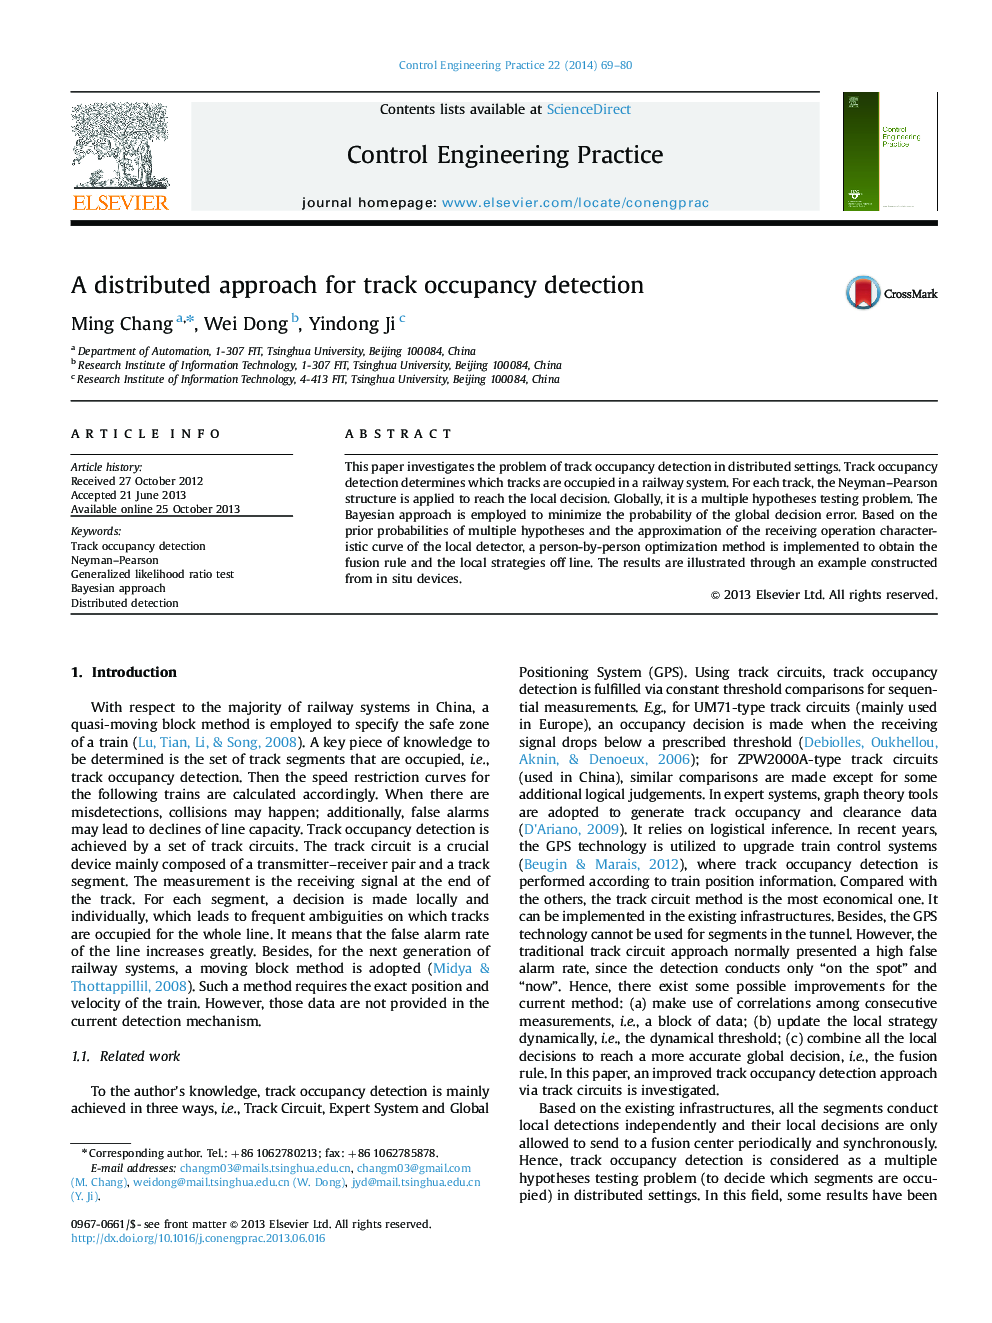 A distributed approach for track occupancy detection